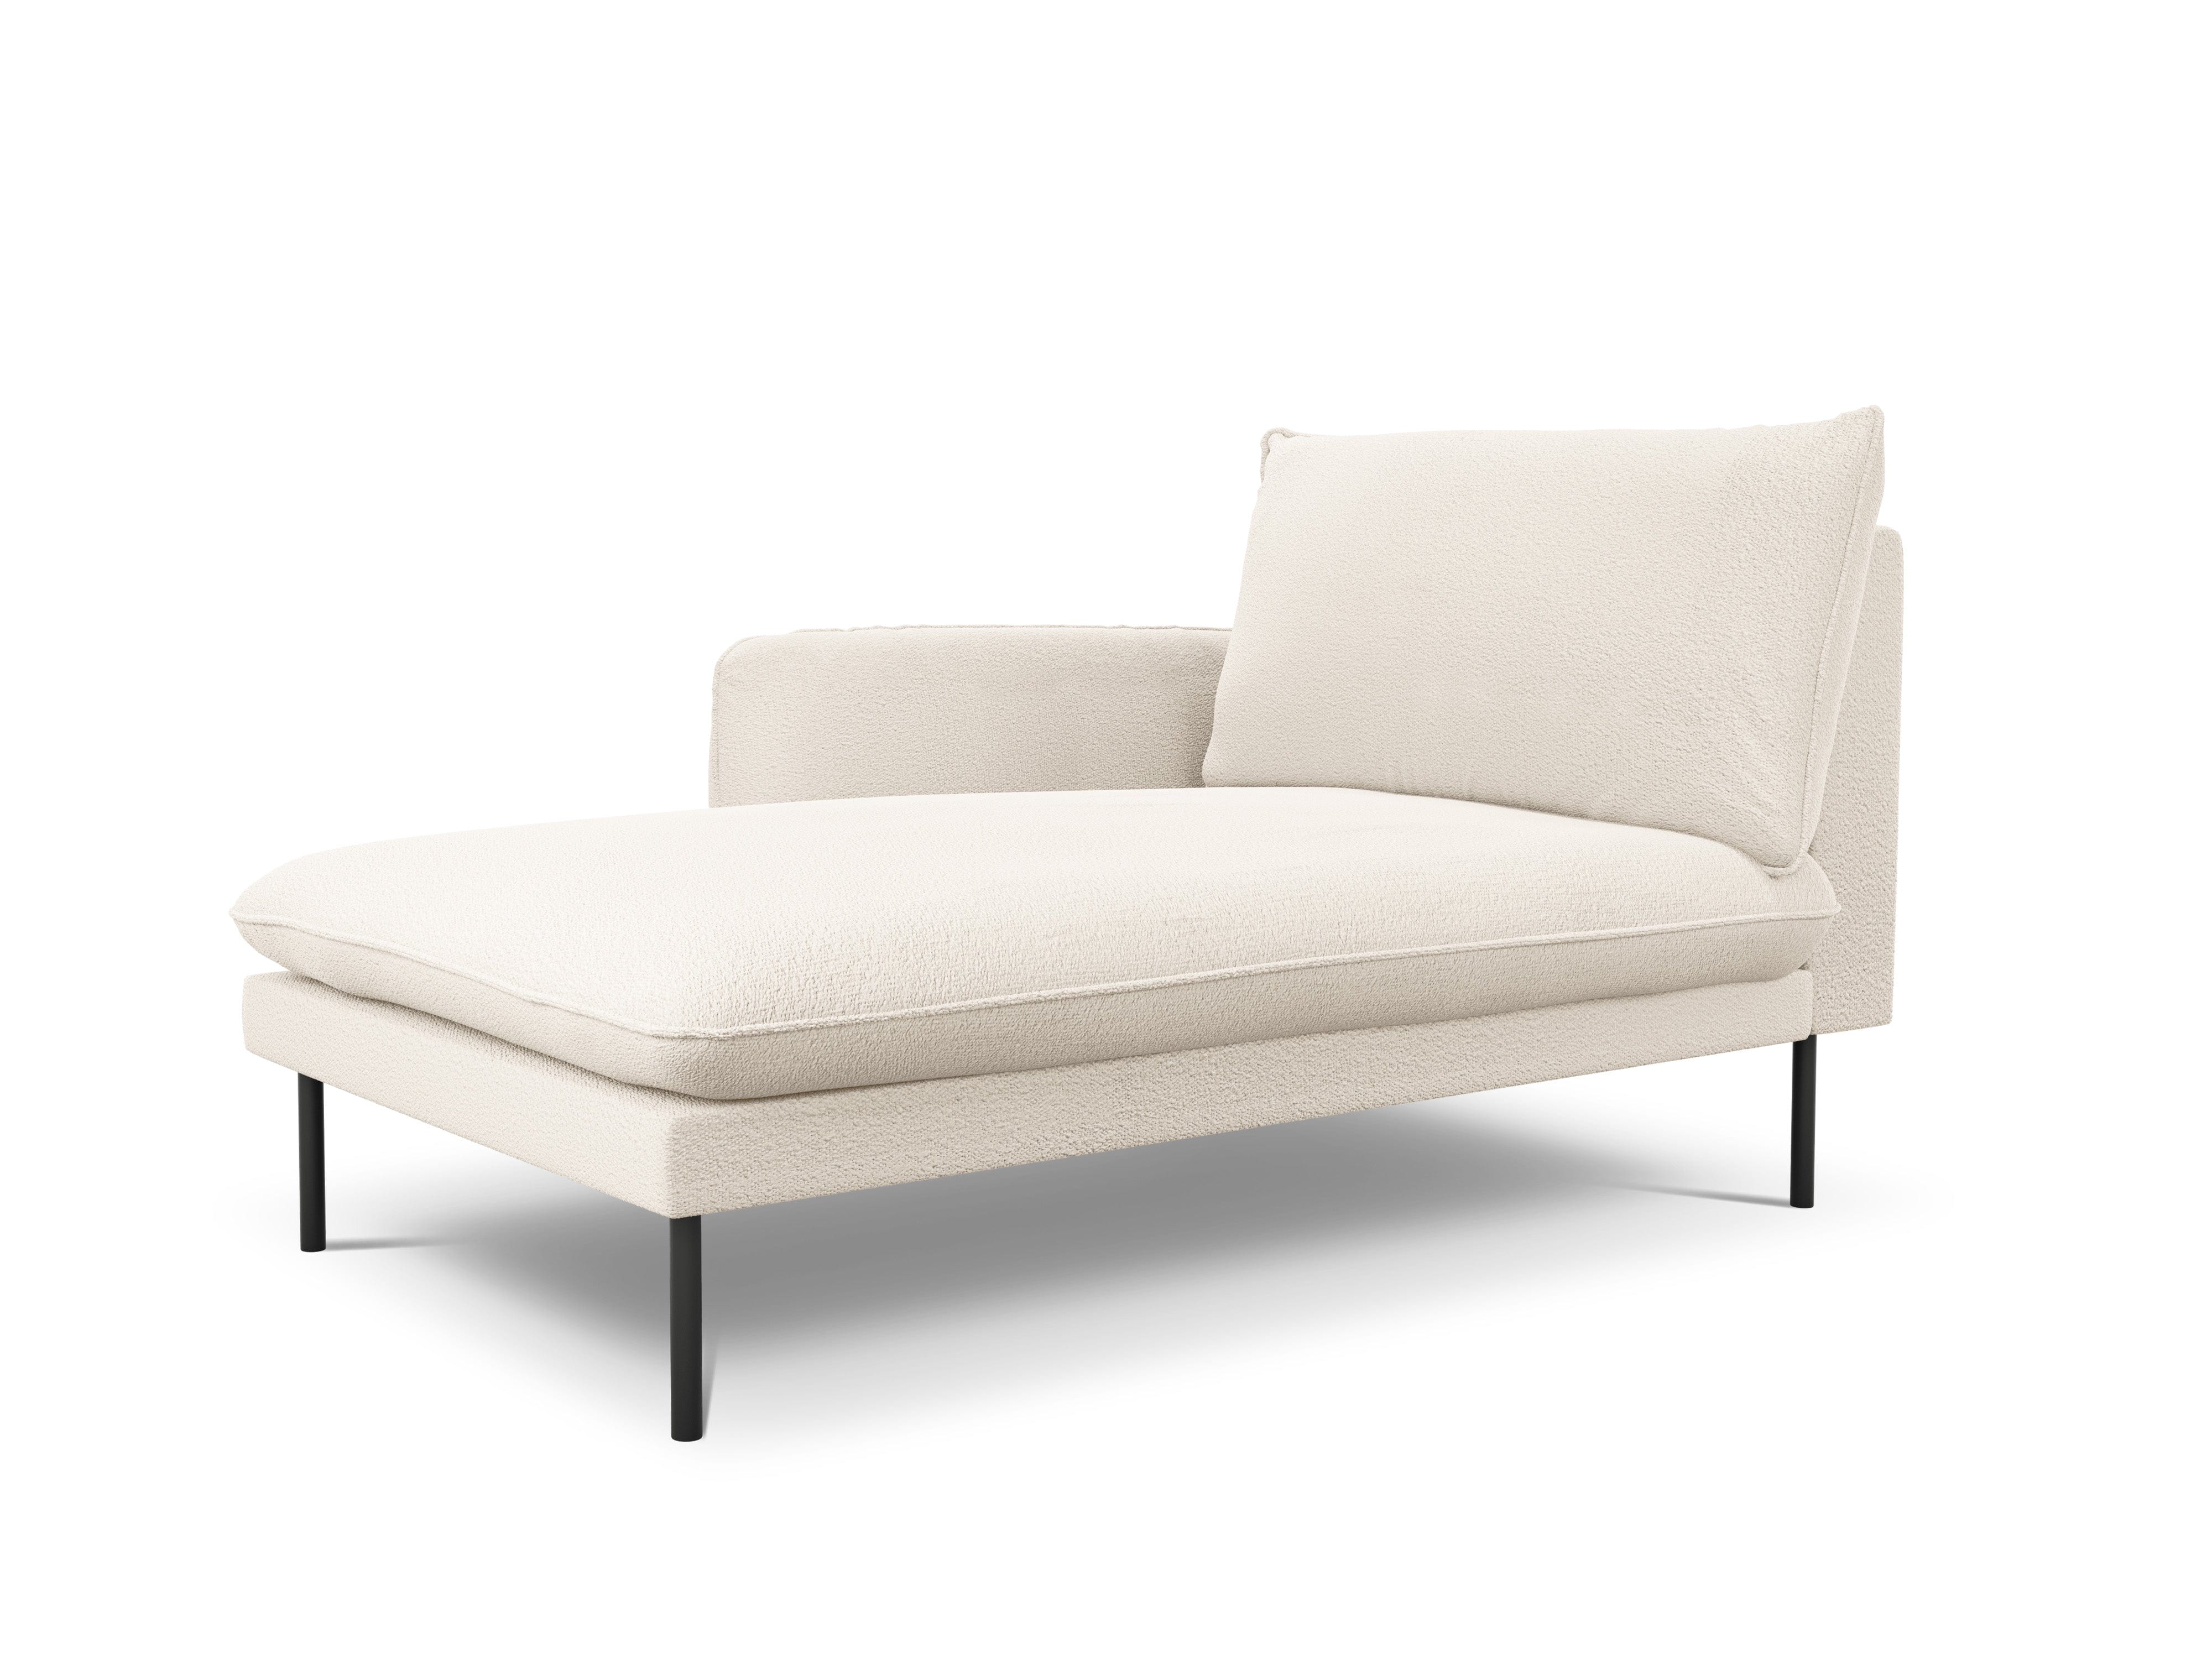 VIENNA chaise longue in boucle fabric left side beige with black base